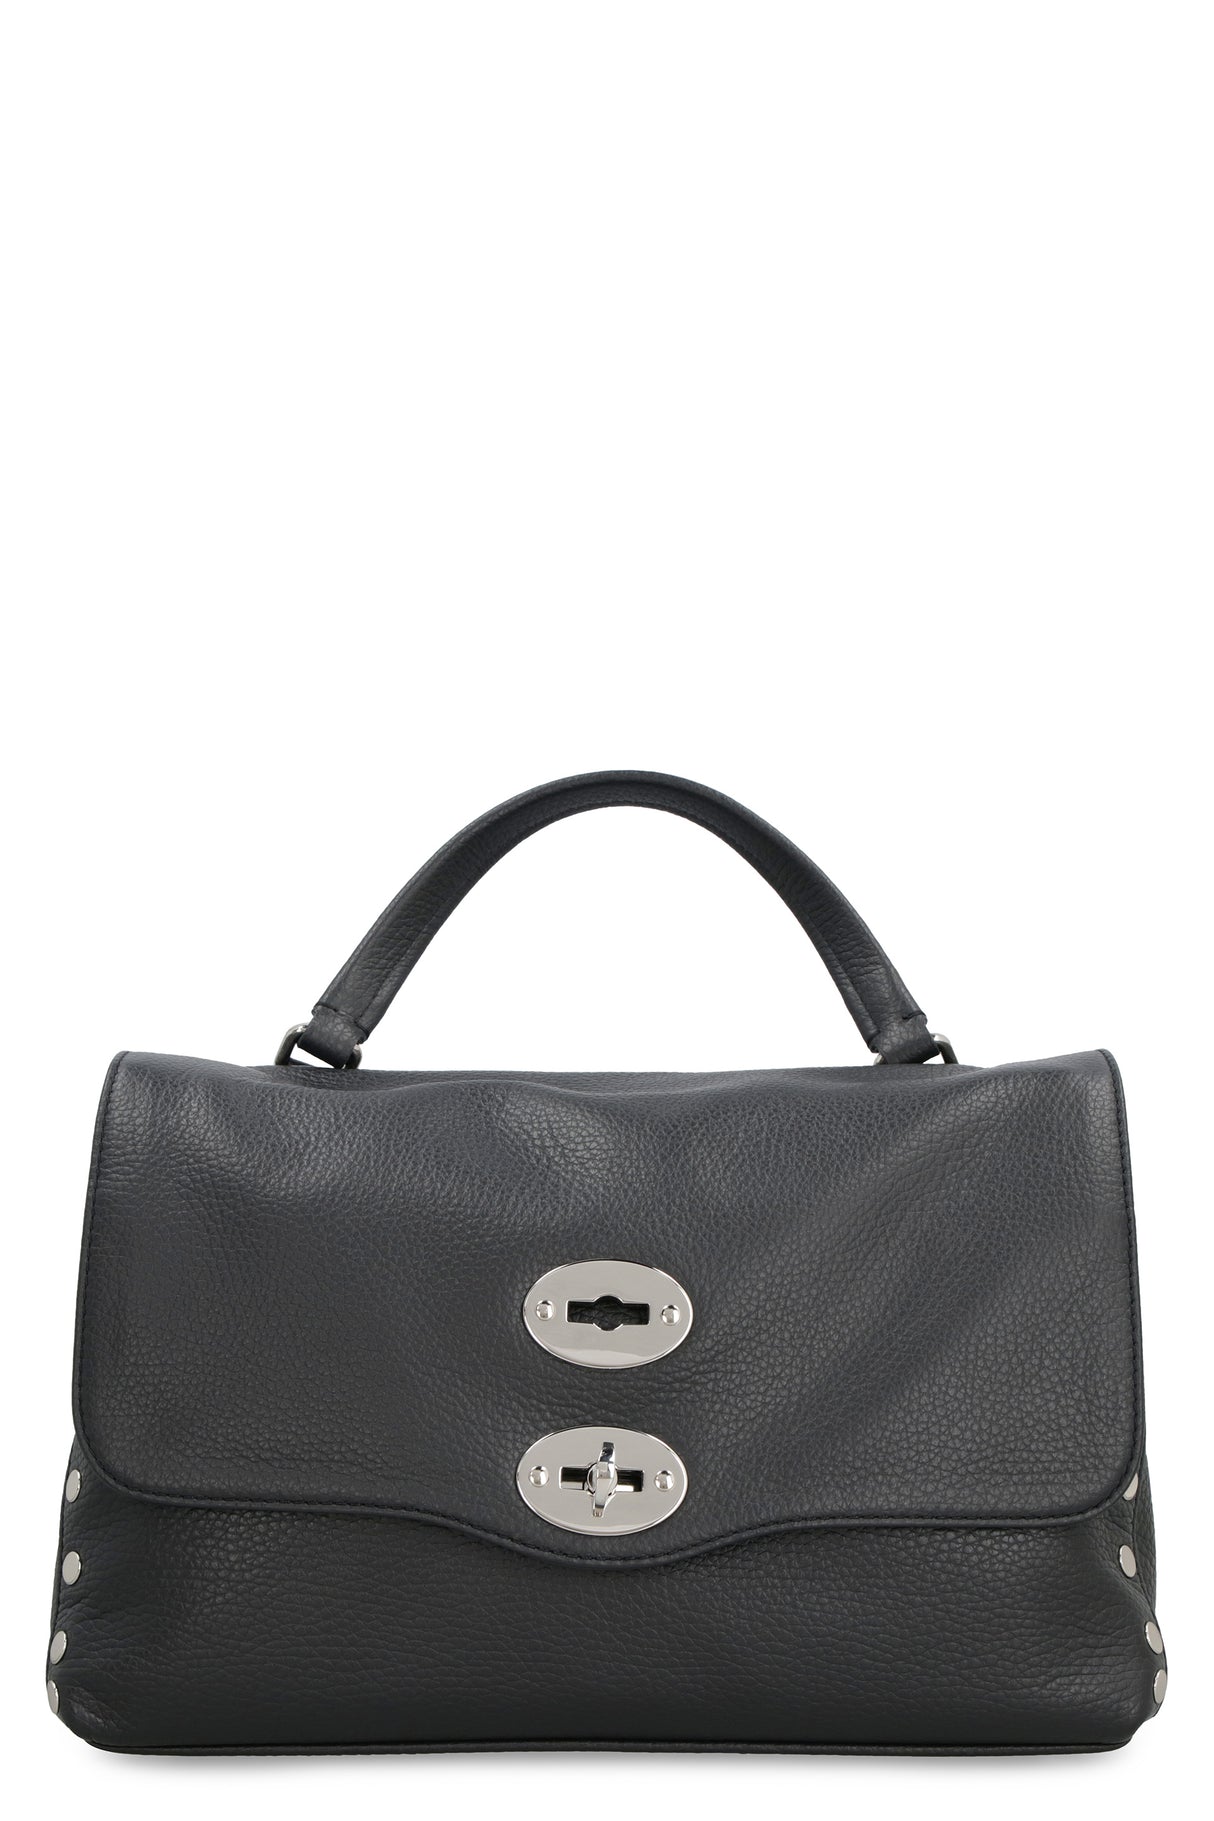 Daily Collection Grainy Leather Handbag with Decorative Studs in Black